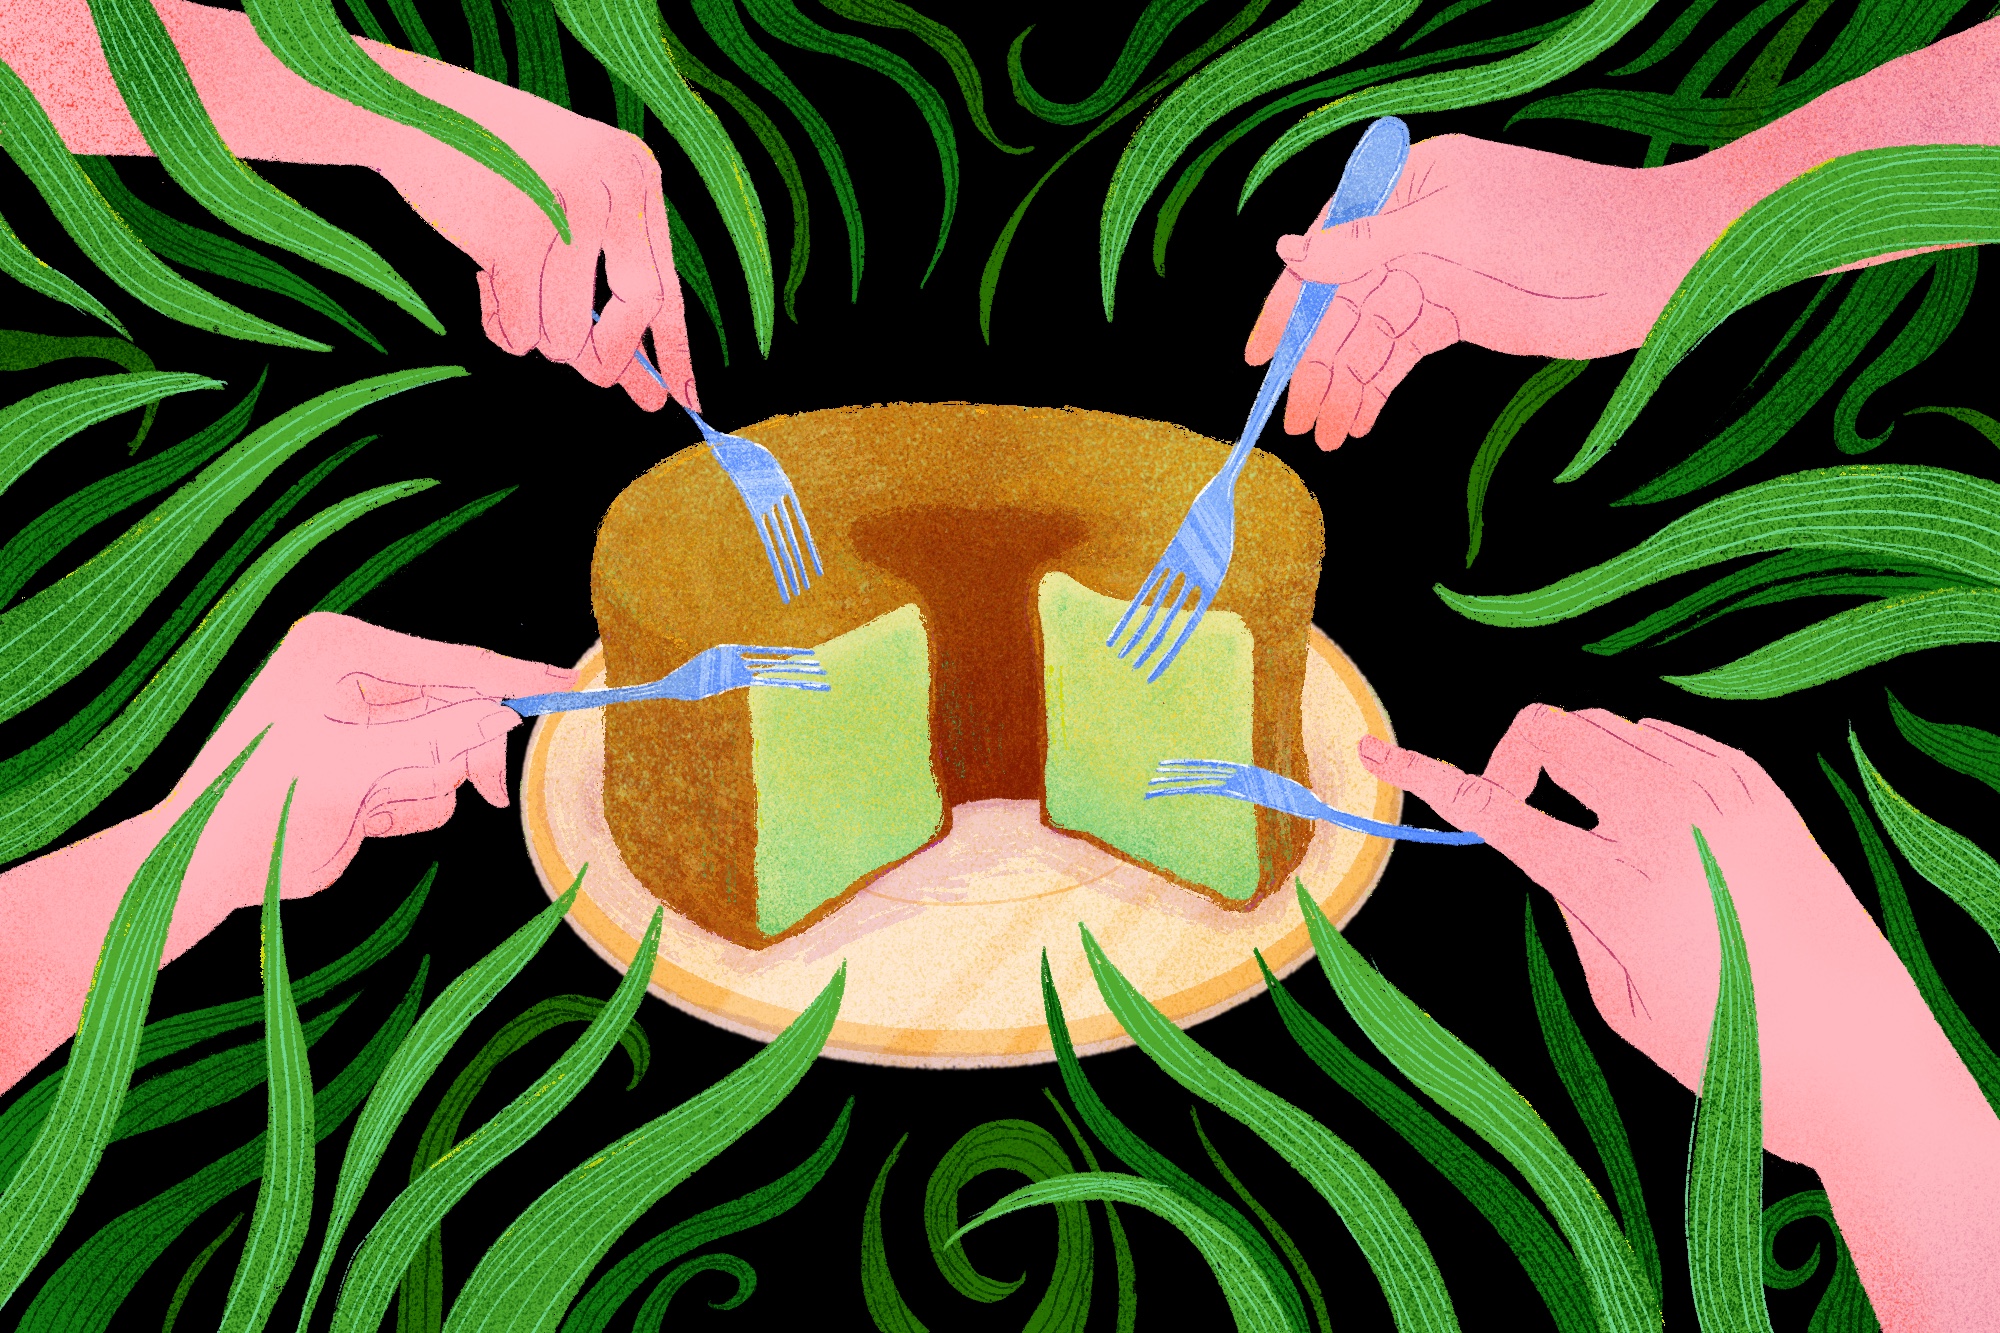 Illustration of a bundt-shaped cake with green interior as several hands and forks poke at it.